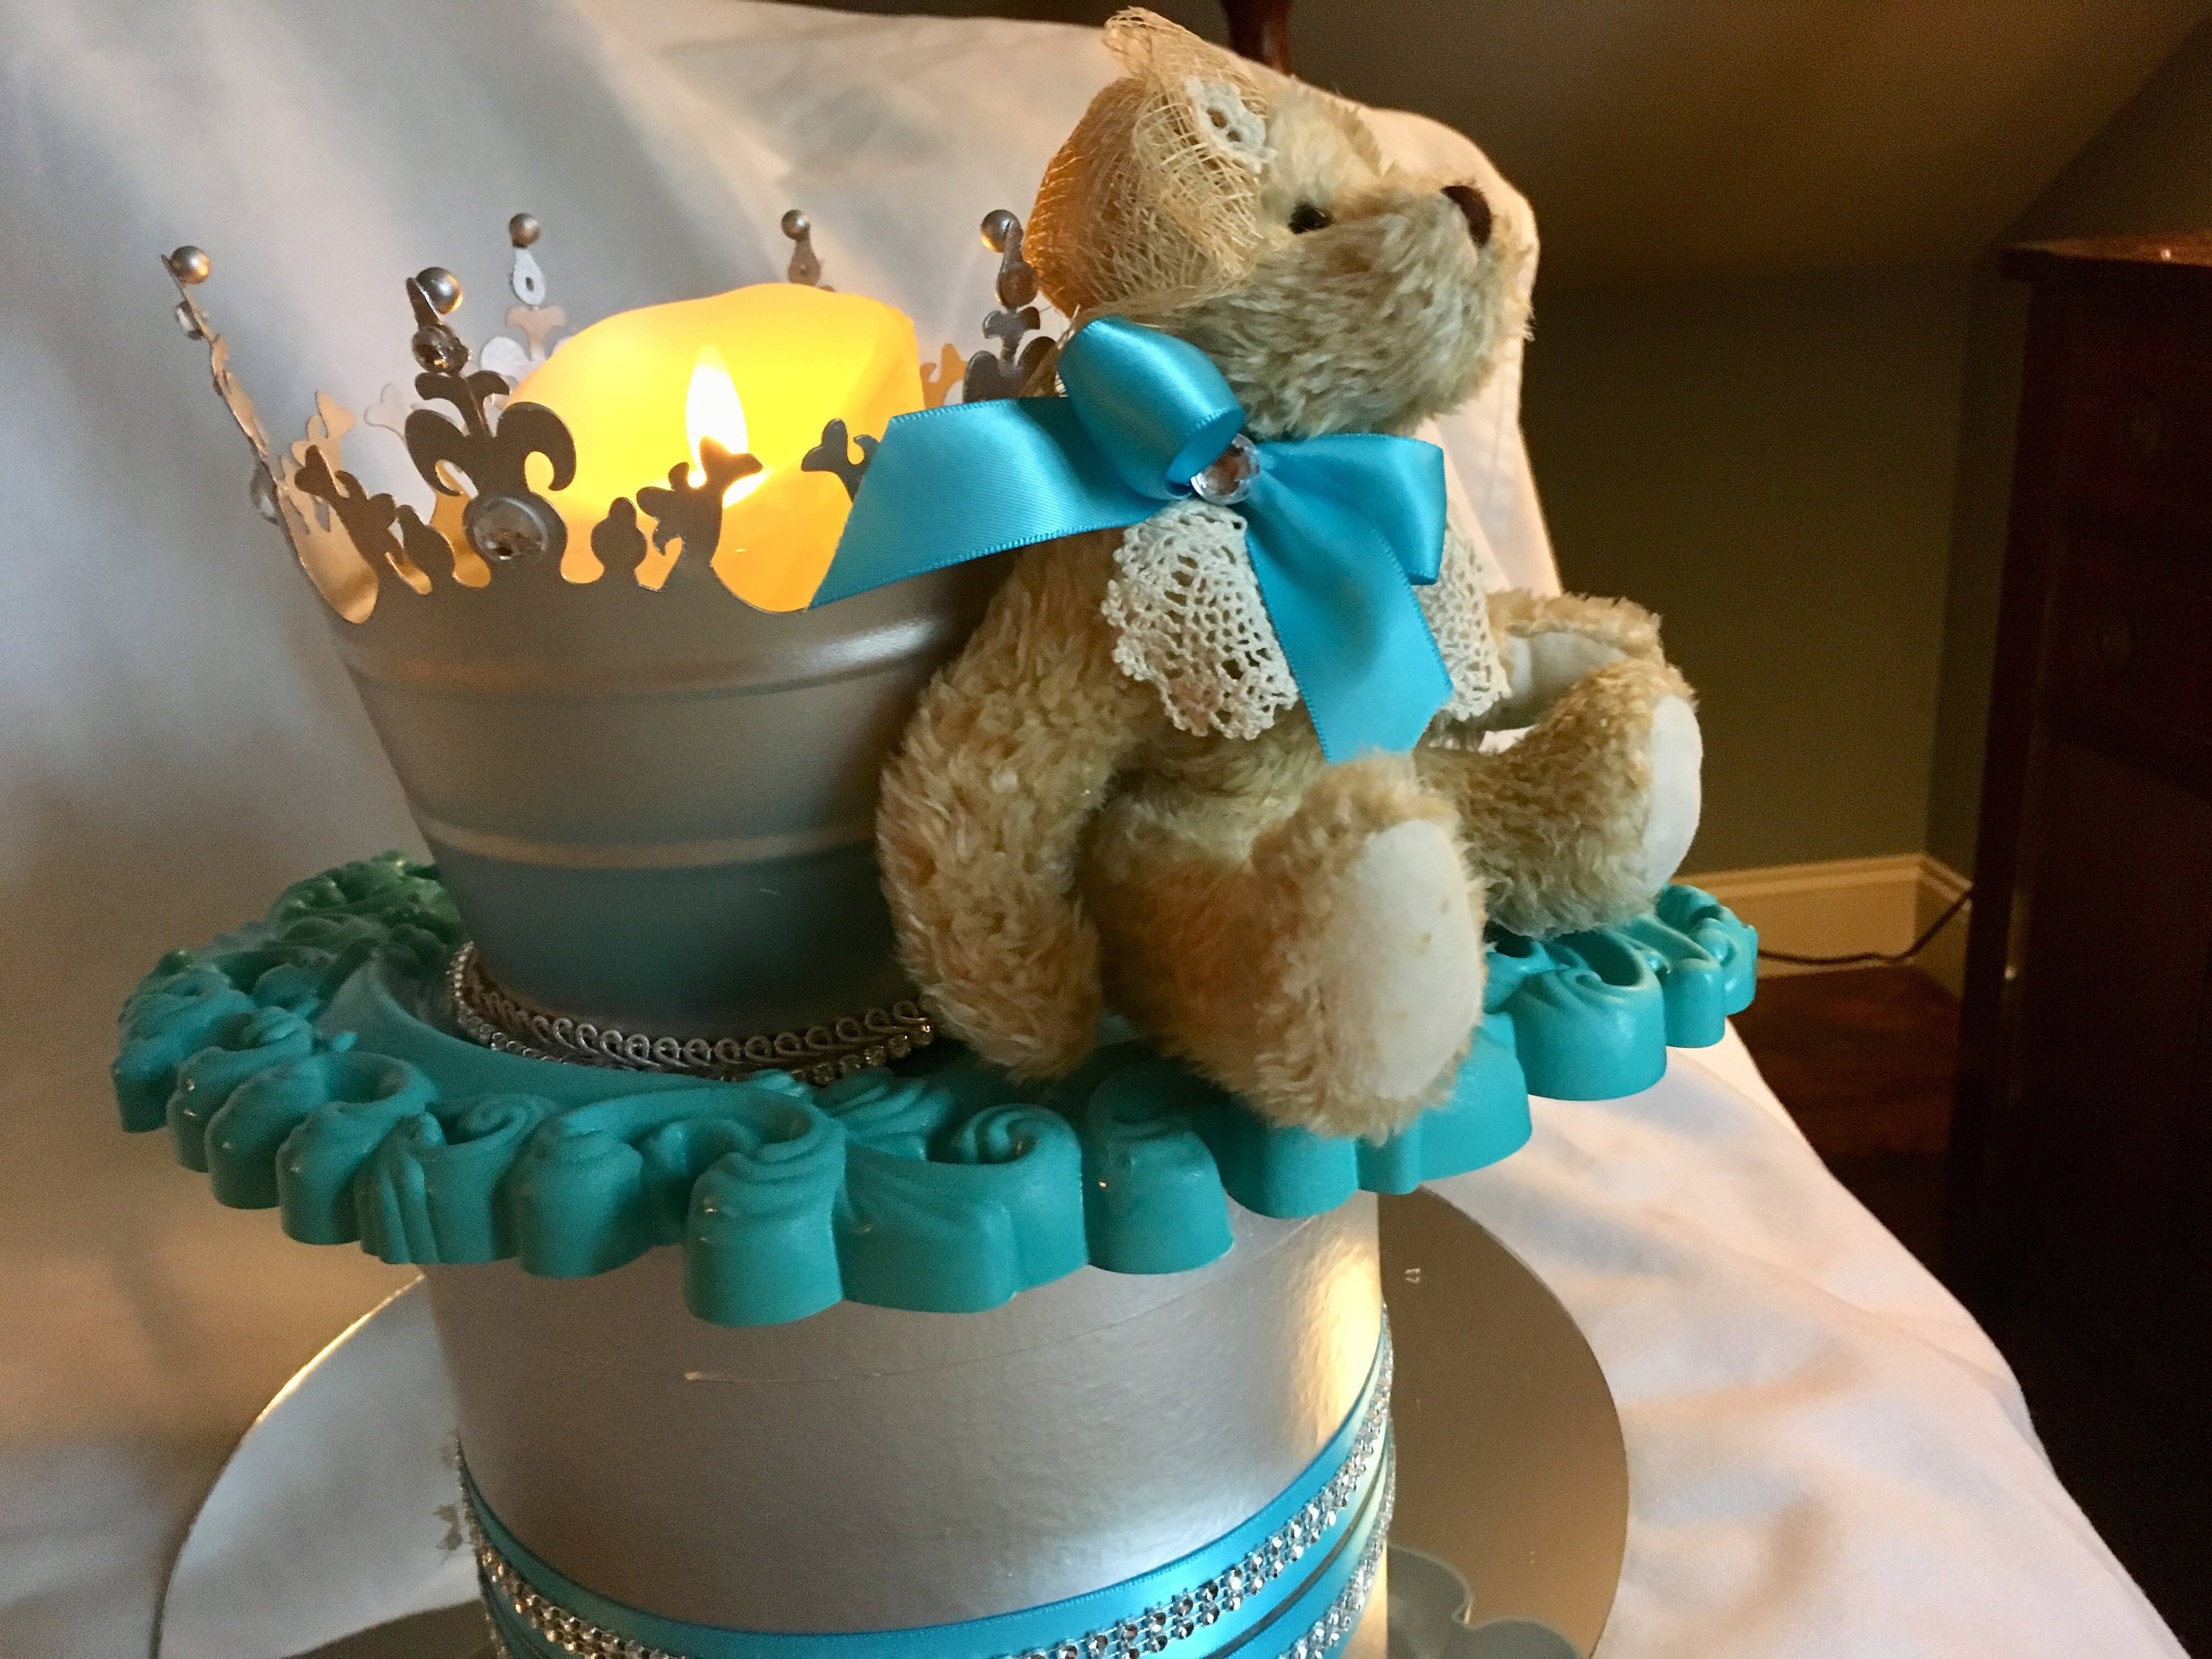 Teddy Bear Centerpiece Baby Shower Centerpiece Boy Baby Shower Decoration Royal Shower Centerpiece Little Prince Birthday Crown Decor,Things You Need For A House Party